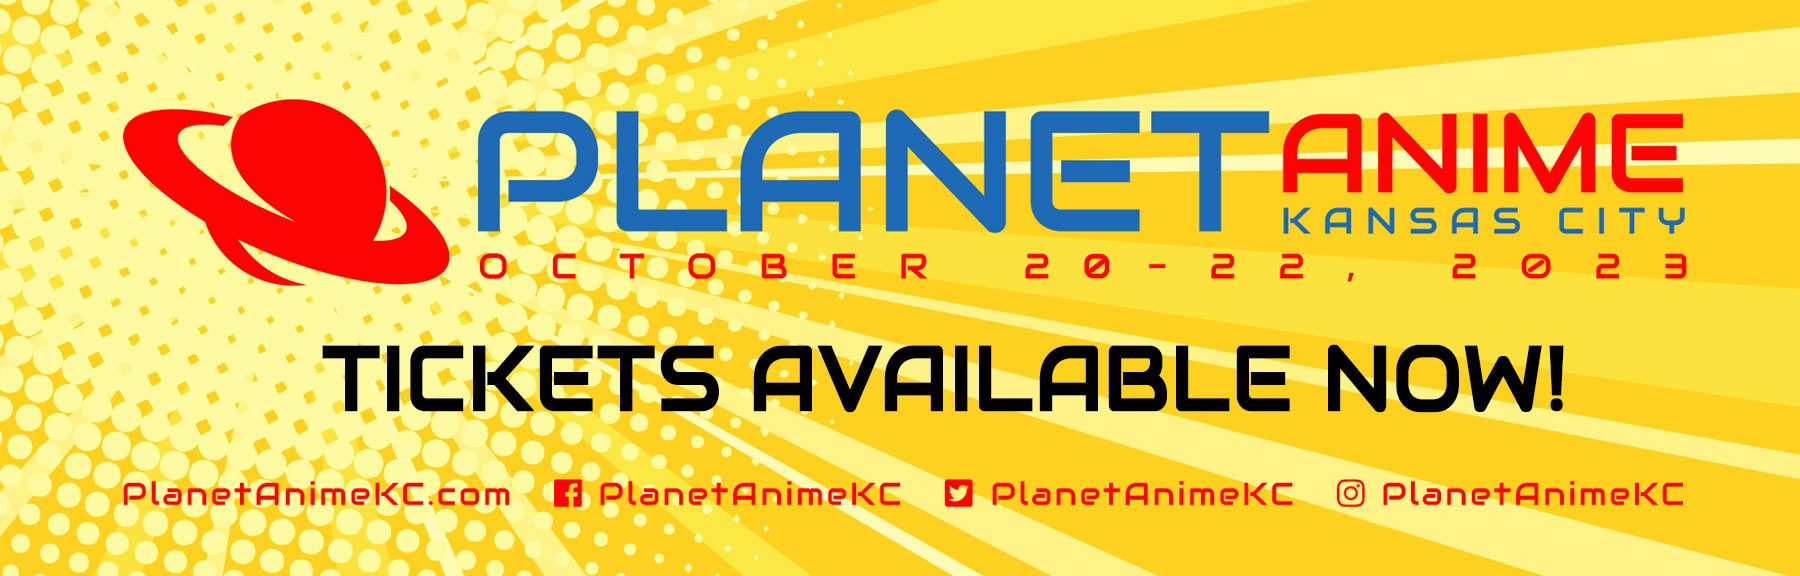 Prince Planet Classic Sci-Fi TV Anime Begins Streaming (Updated) - News -  Anime News Network